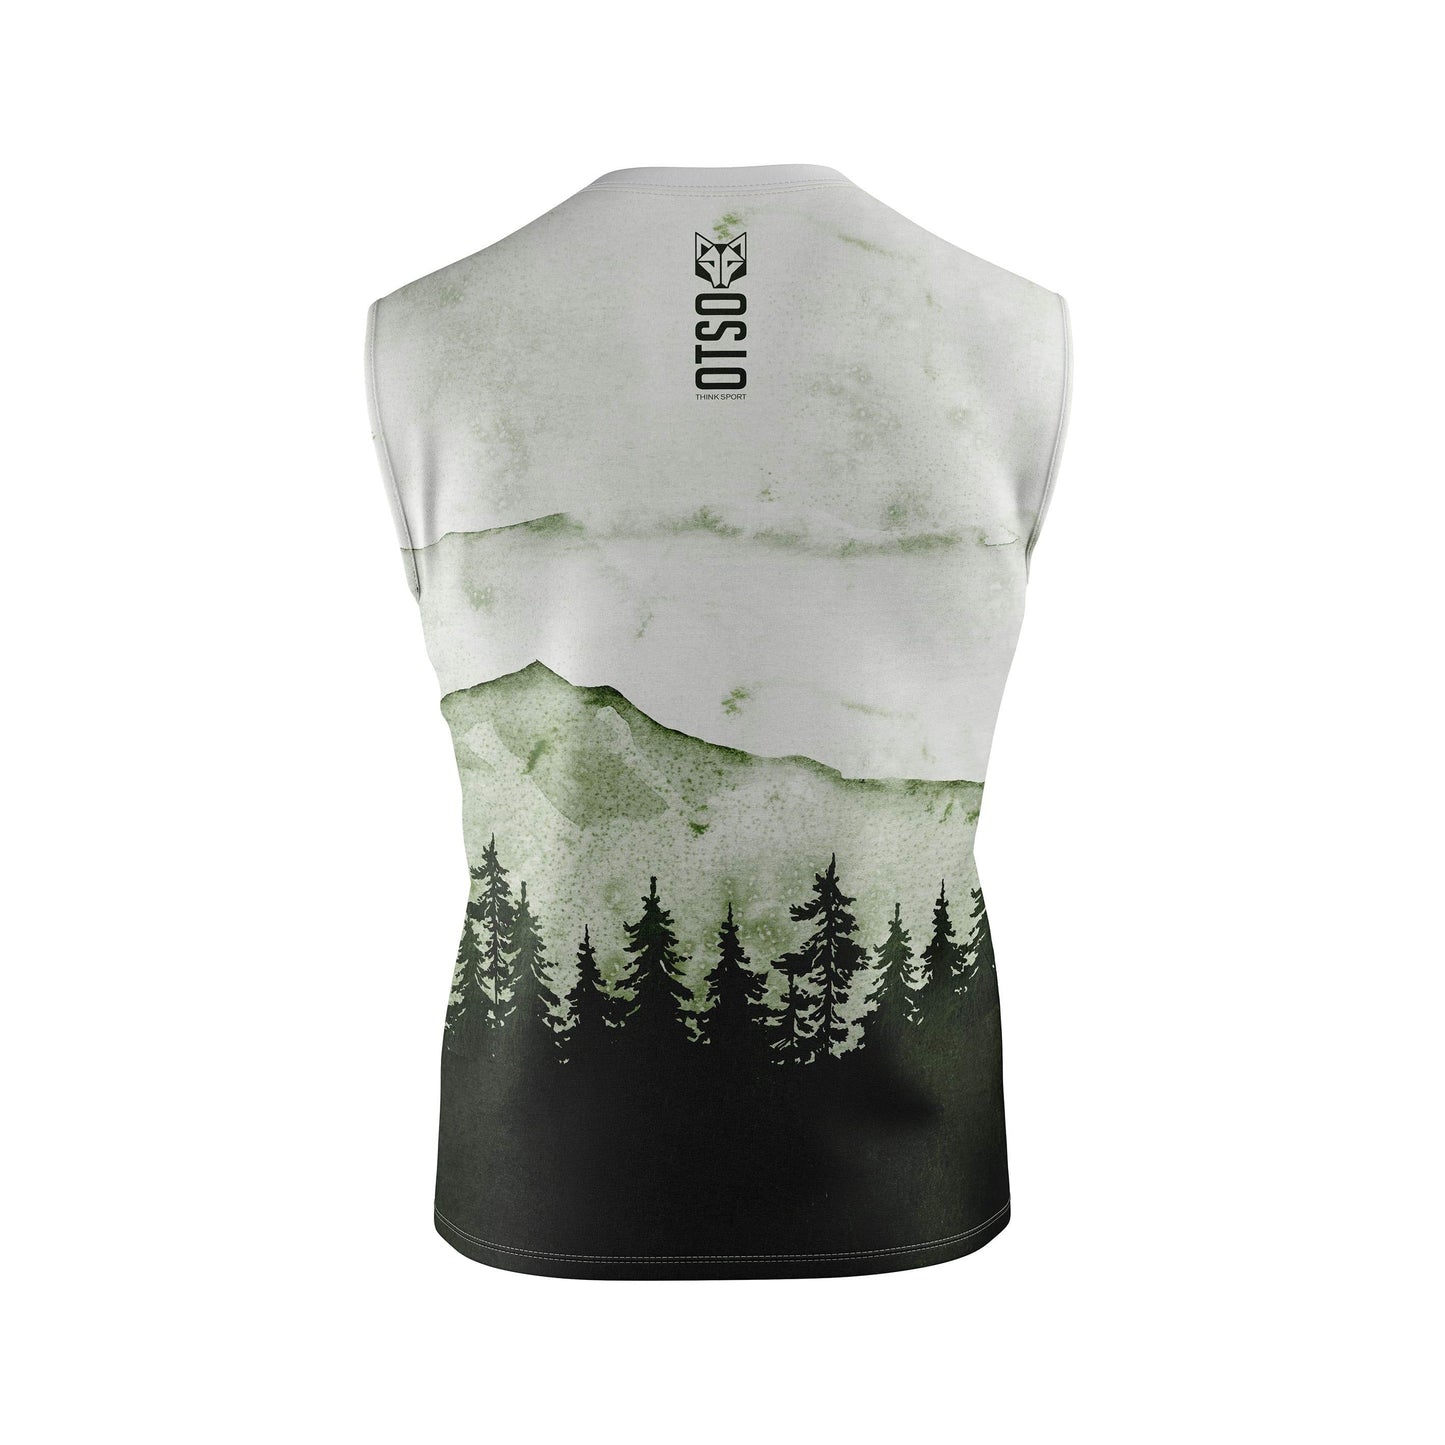 Camiseta sin mangas hombre - Green Forest